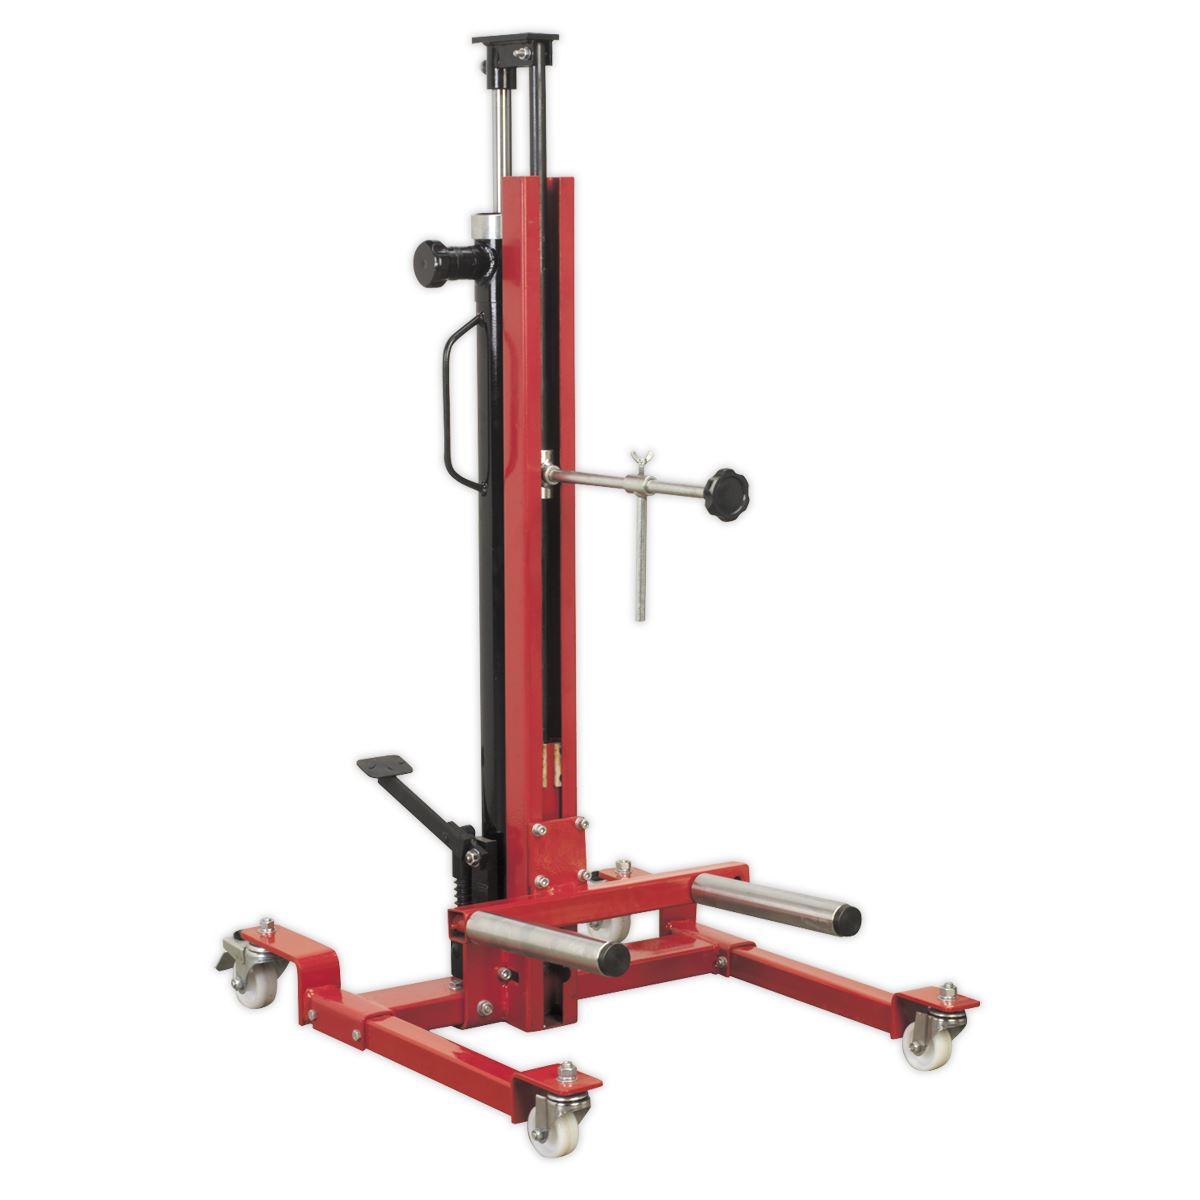 Sealey Quick Lift Wheel Removal/Lifter Trolley 80kg